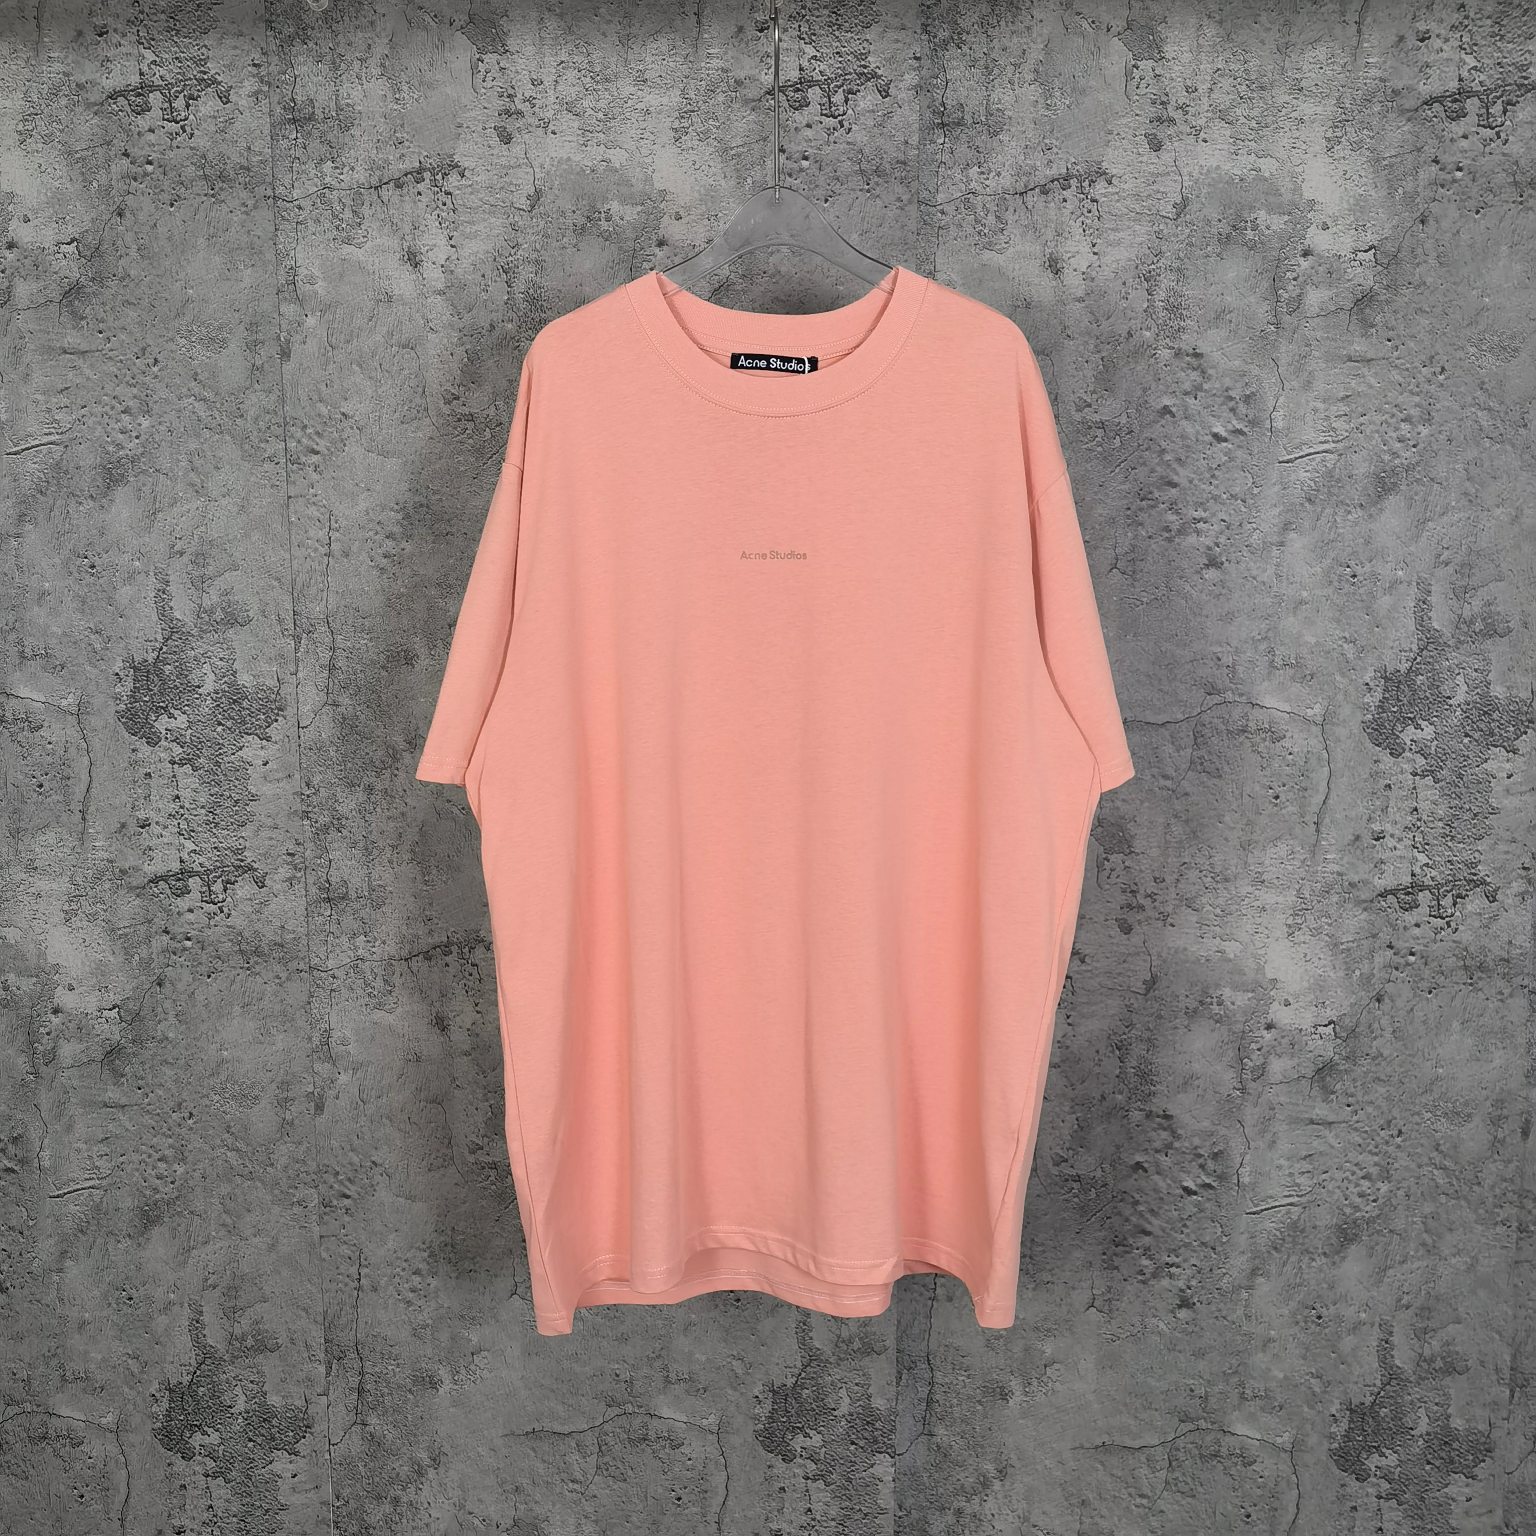 Where To Buy The Best Replica
 Acne Studios Clothing T-Shirt Black Green Pink White Printing Cotton Short Sleeve